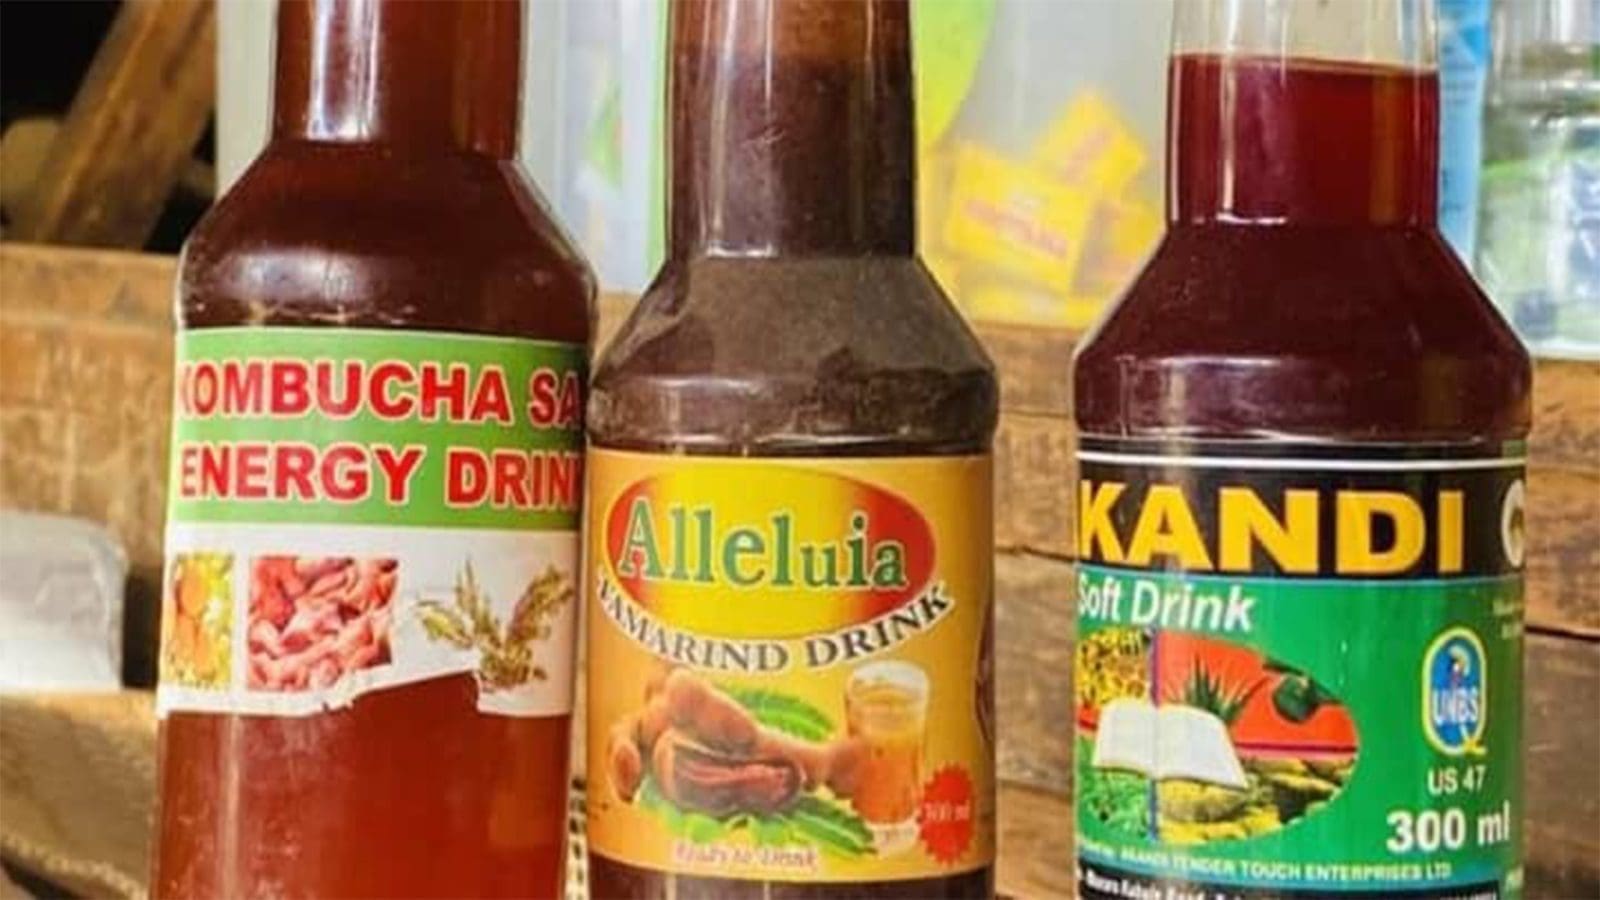 UNBS urges Kombucha manufacturers to adhere to set standards